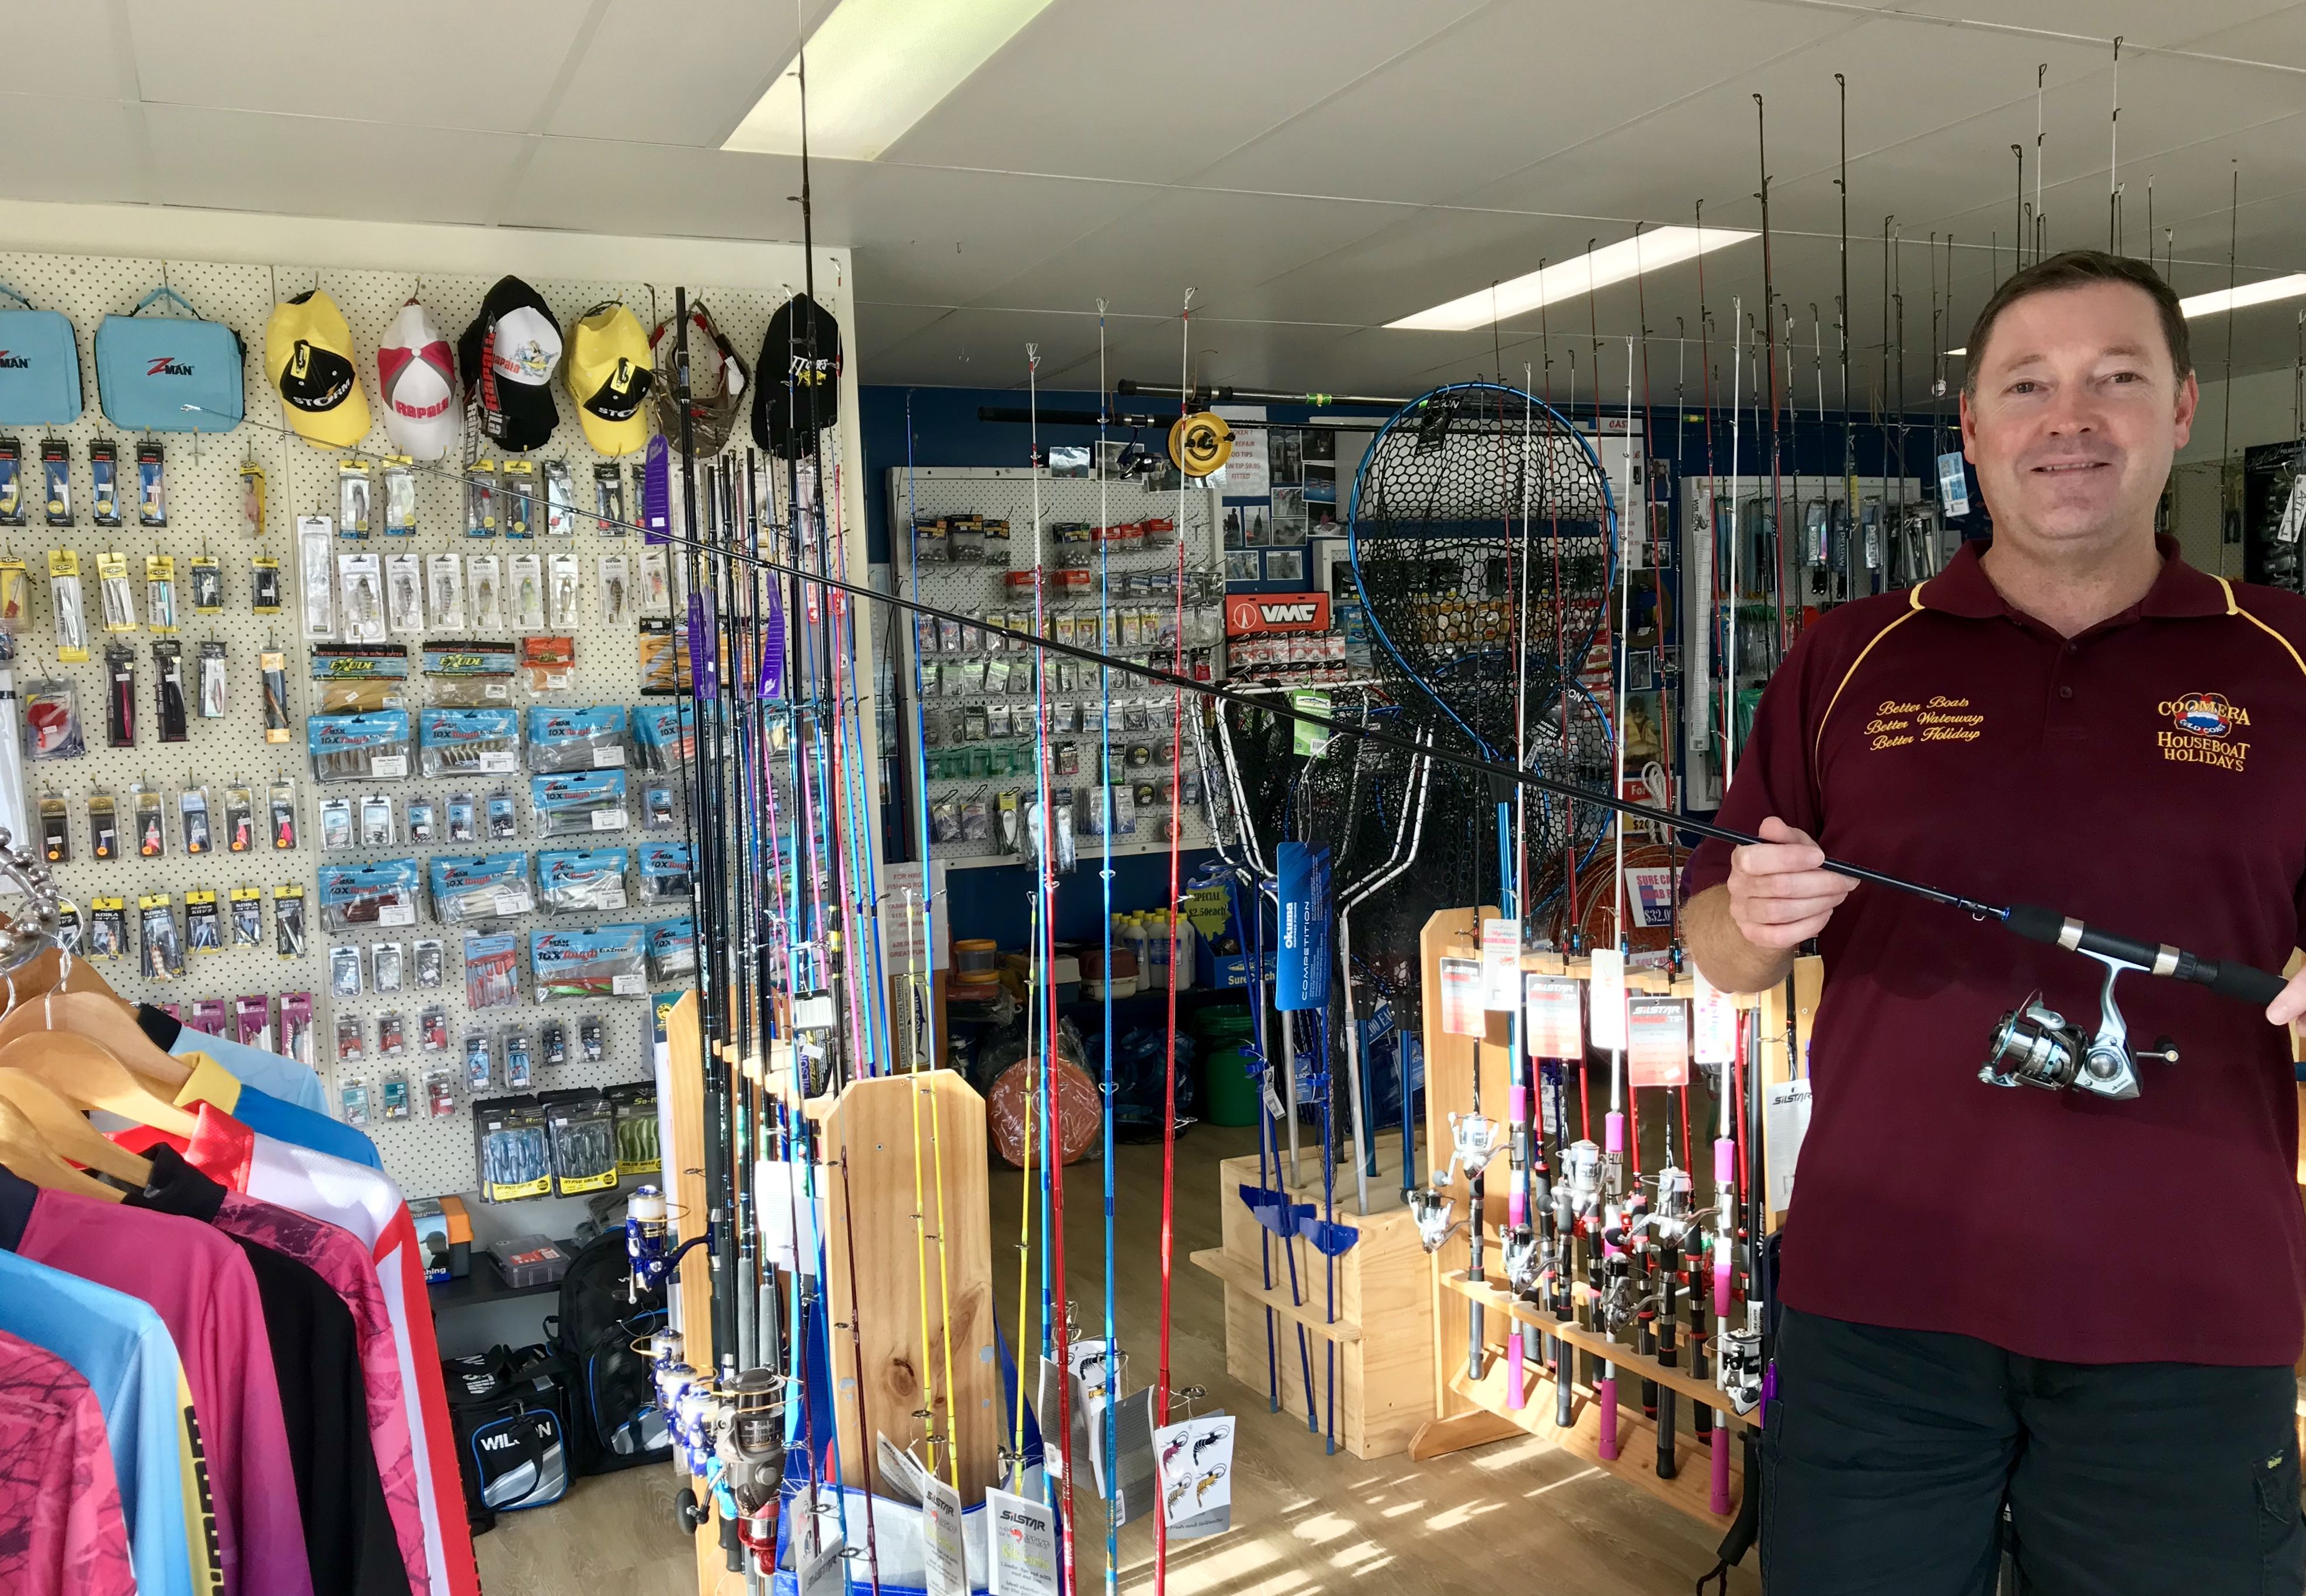 COOMERA BAIT & TACKLE SHOP - ALL YOUR FISHING & CRABBING NEEDS, PLUS ICE &  LPG REFILLS.